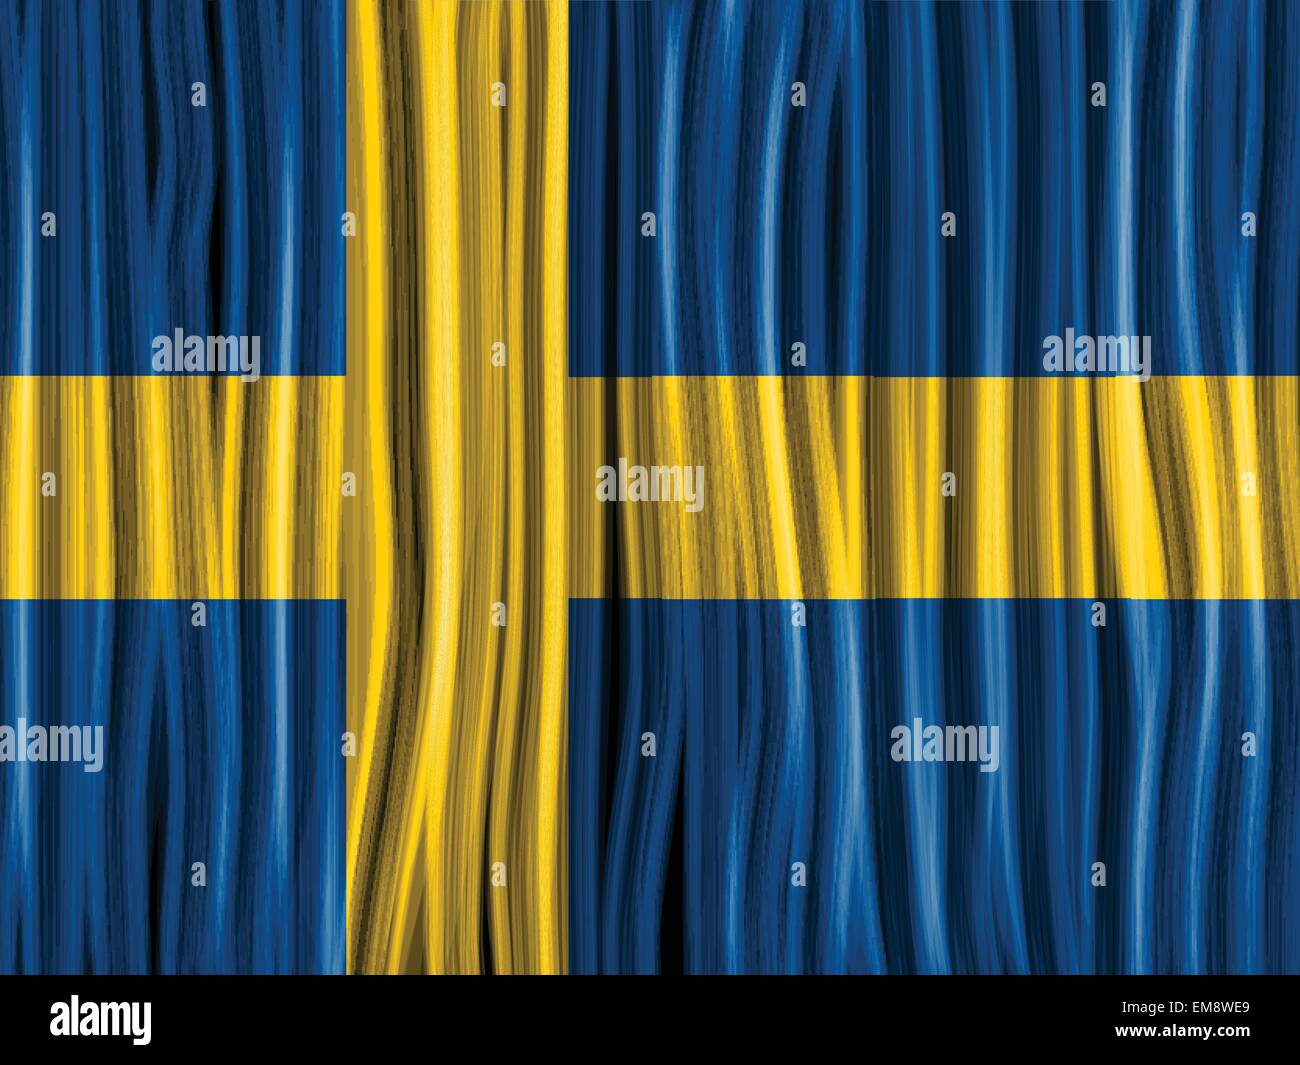 Sweden Flag Wave Fabric Texture Background Stock Vector